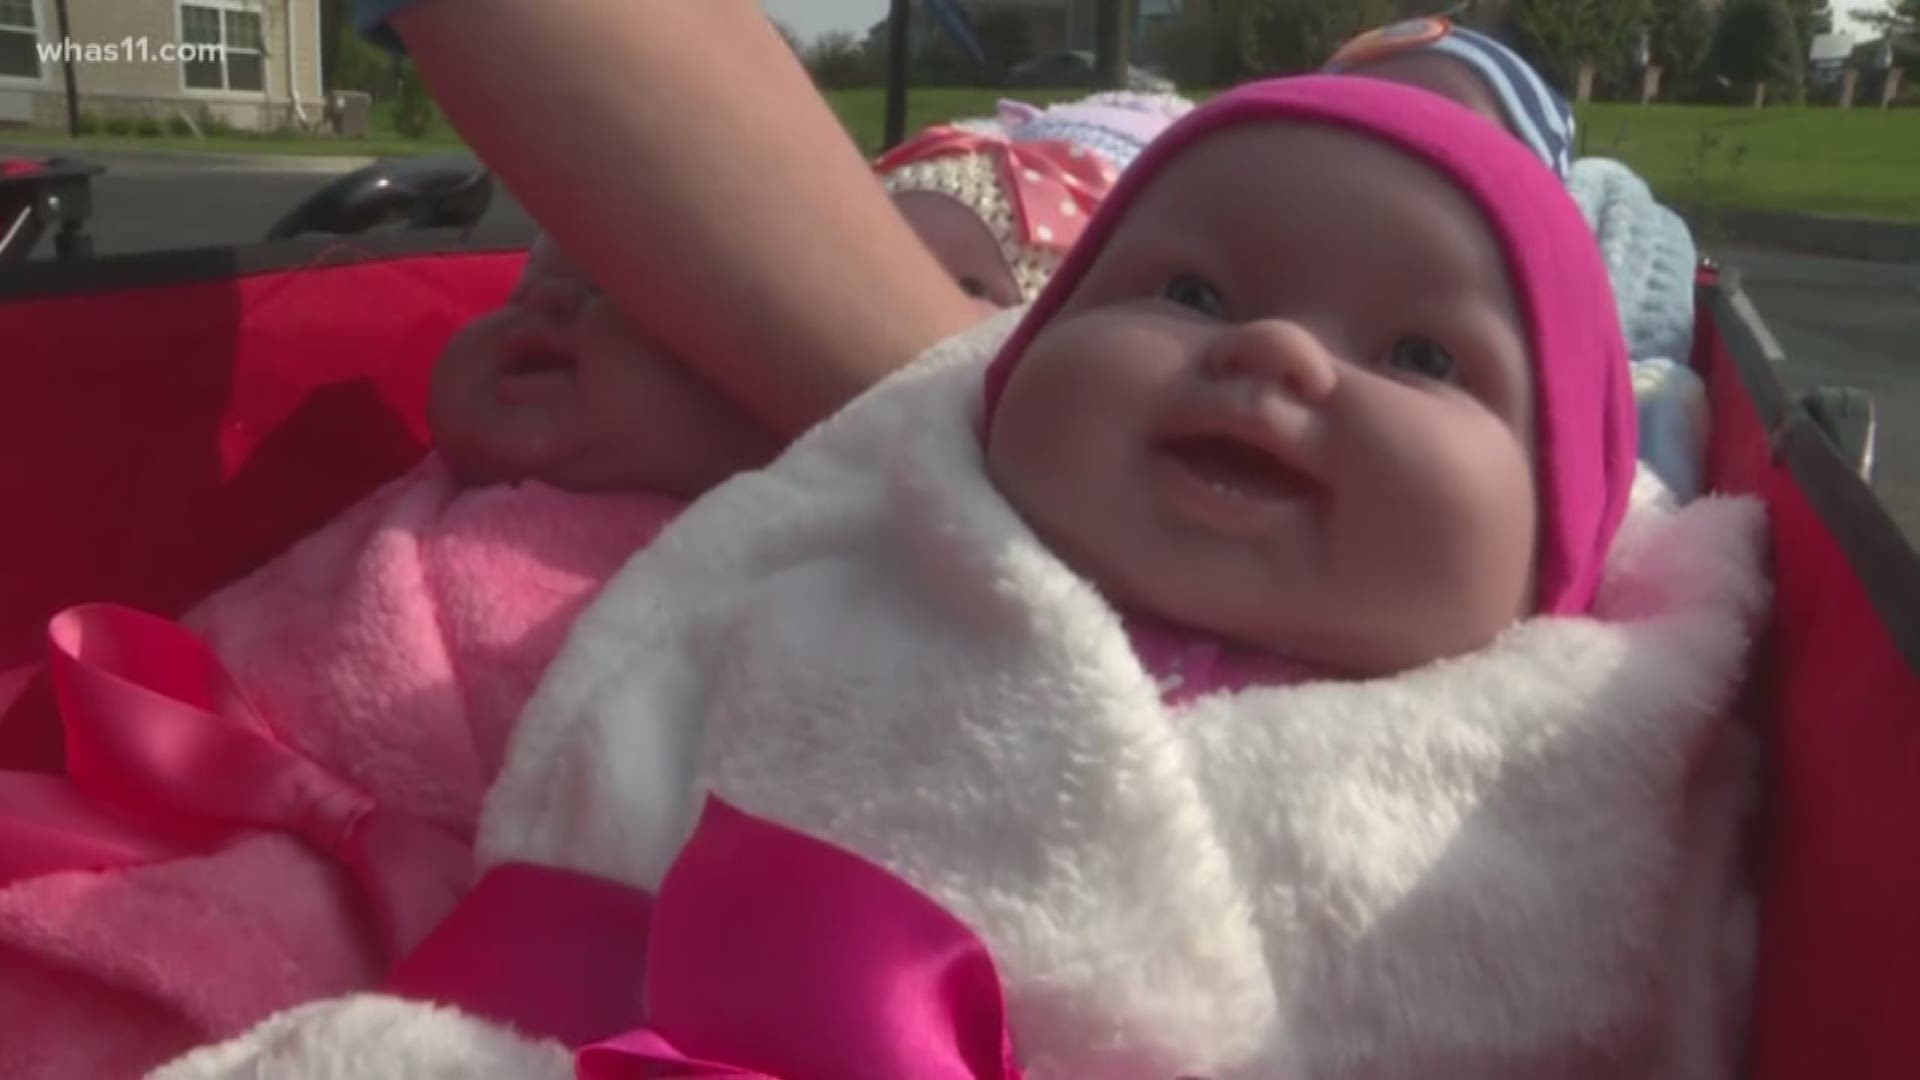 A baby doll may not seem like much but, to these Alzheimer's and Dementia patients, these dolls change everything. Two Kentucky women are bringing some much-needed joy to men and women across the state through their non-profit.